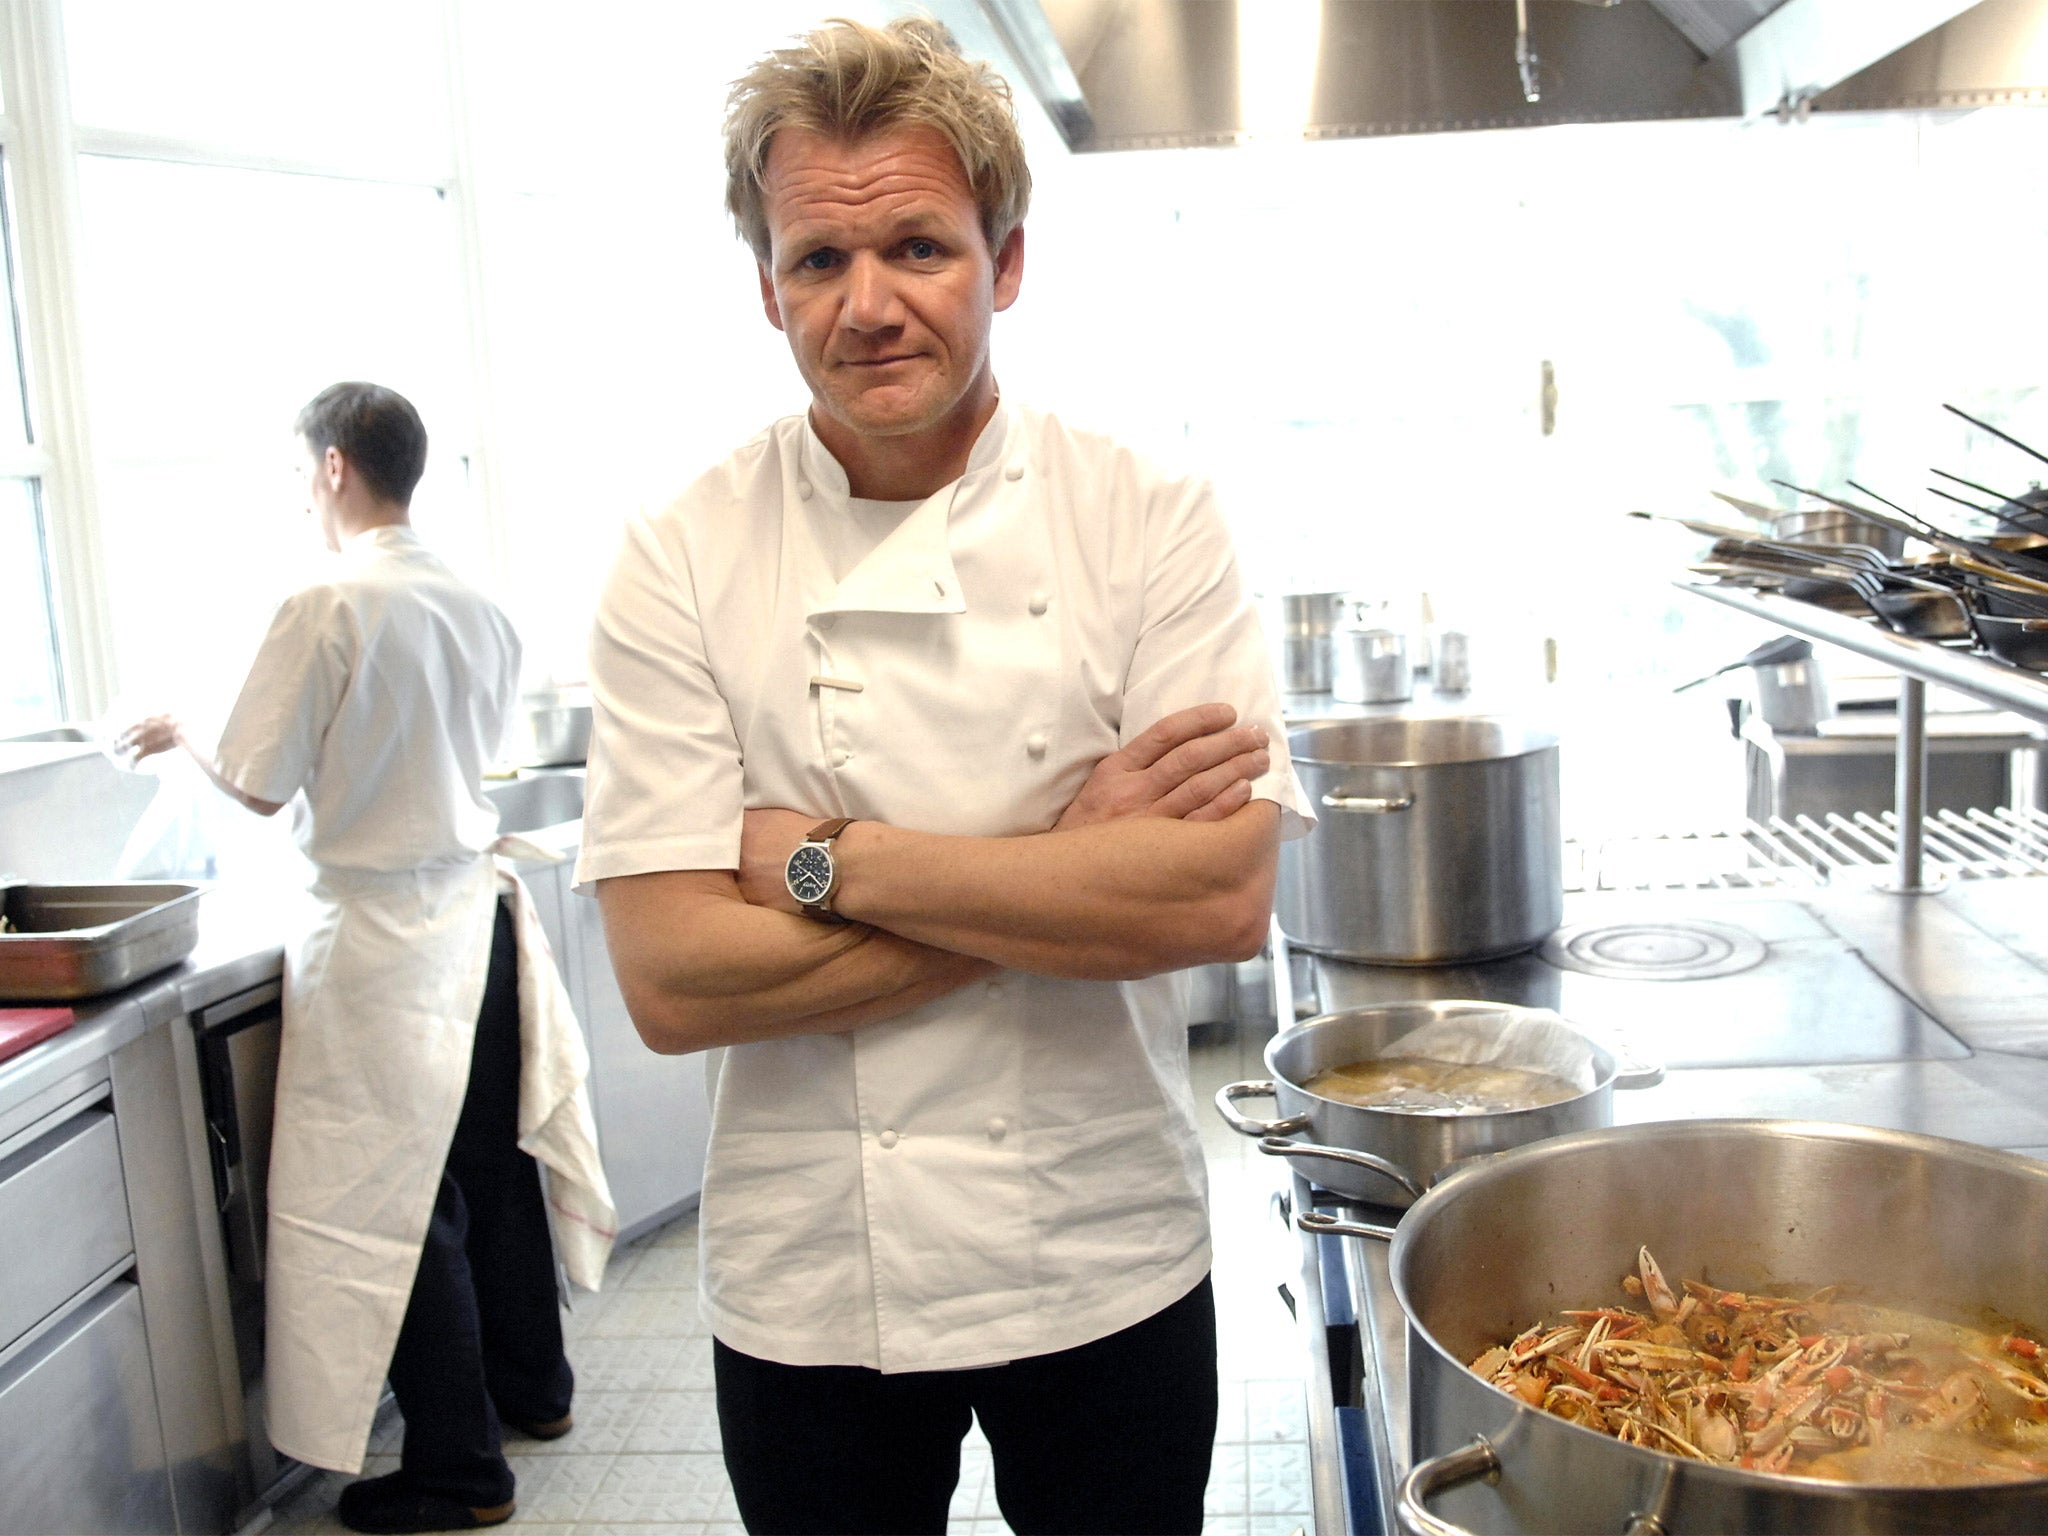 Crying shame: Gordon Ramsay shed tears after losing two stars last year